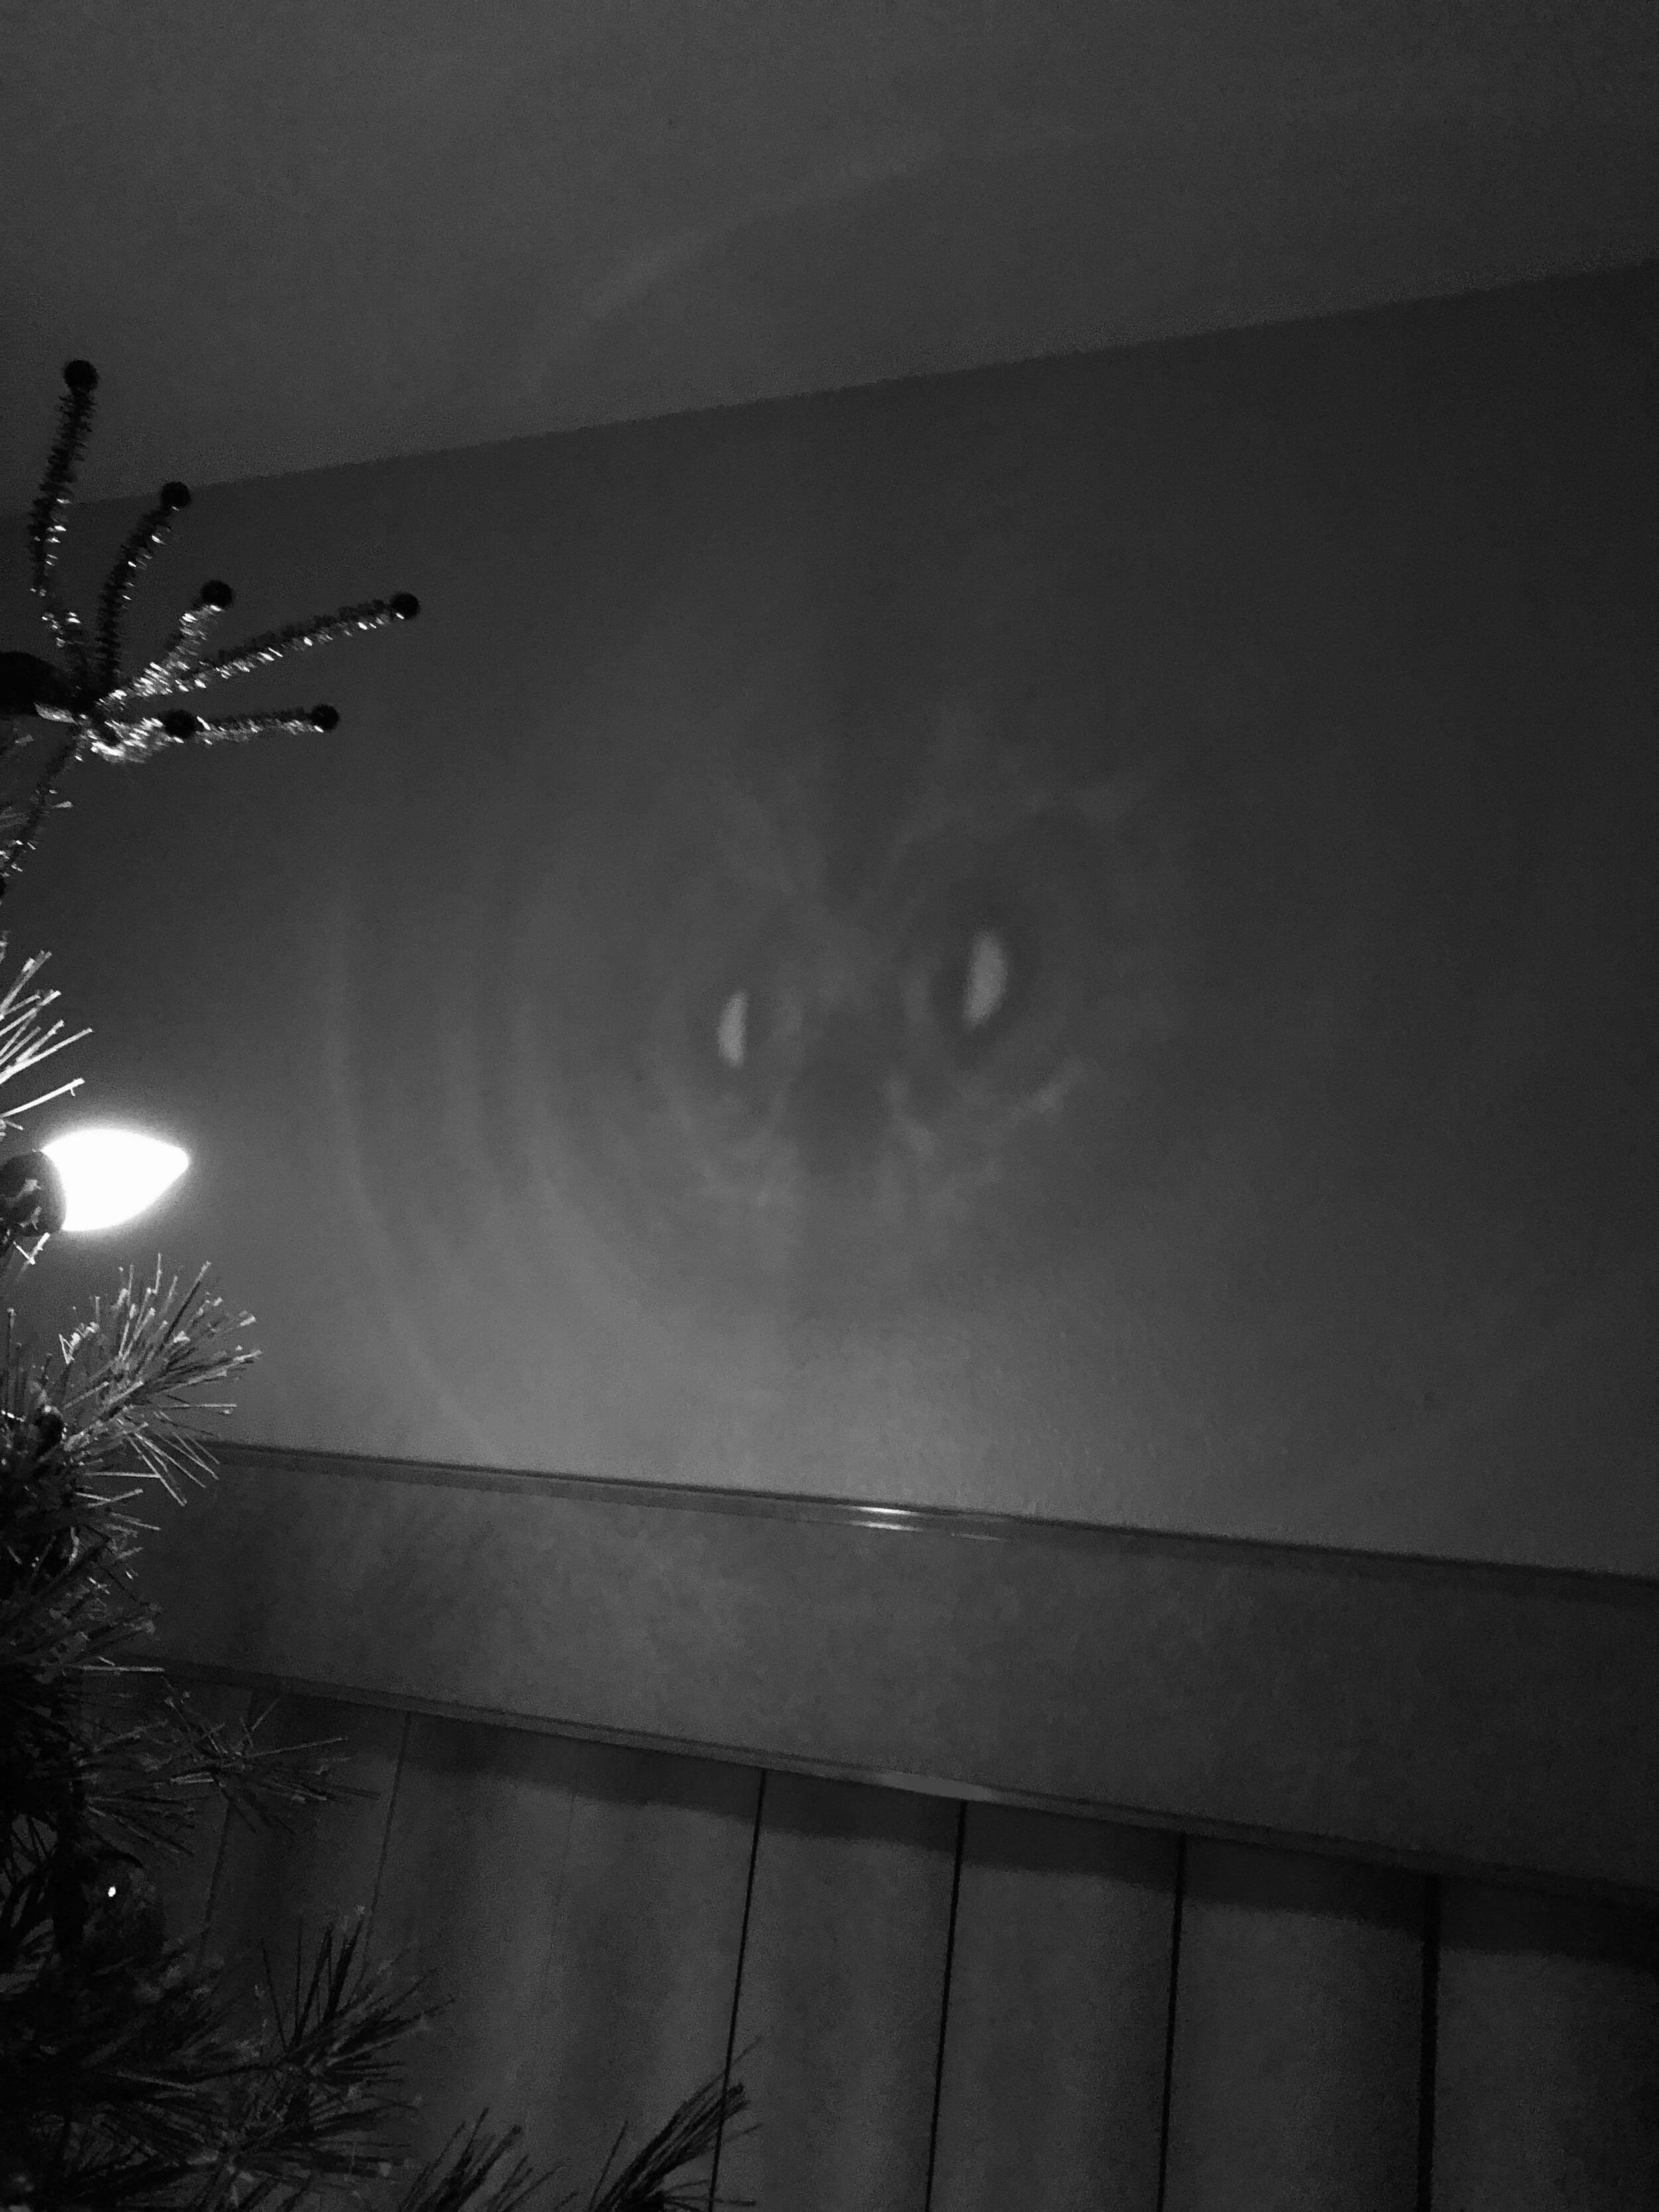 Image of owl on wall from Xmas lights.jpg